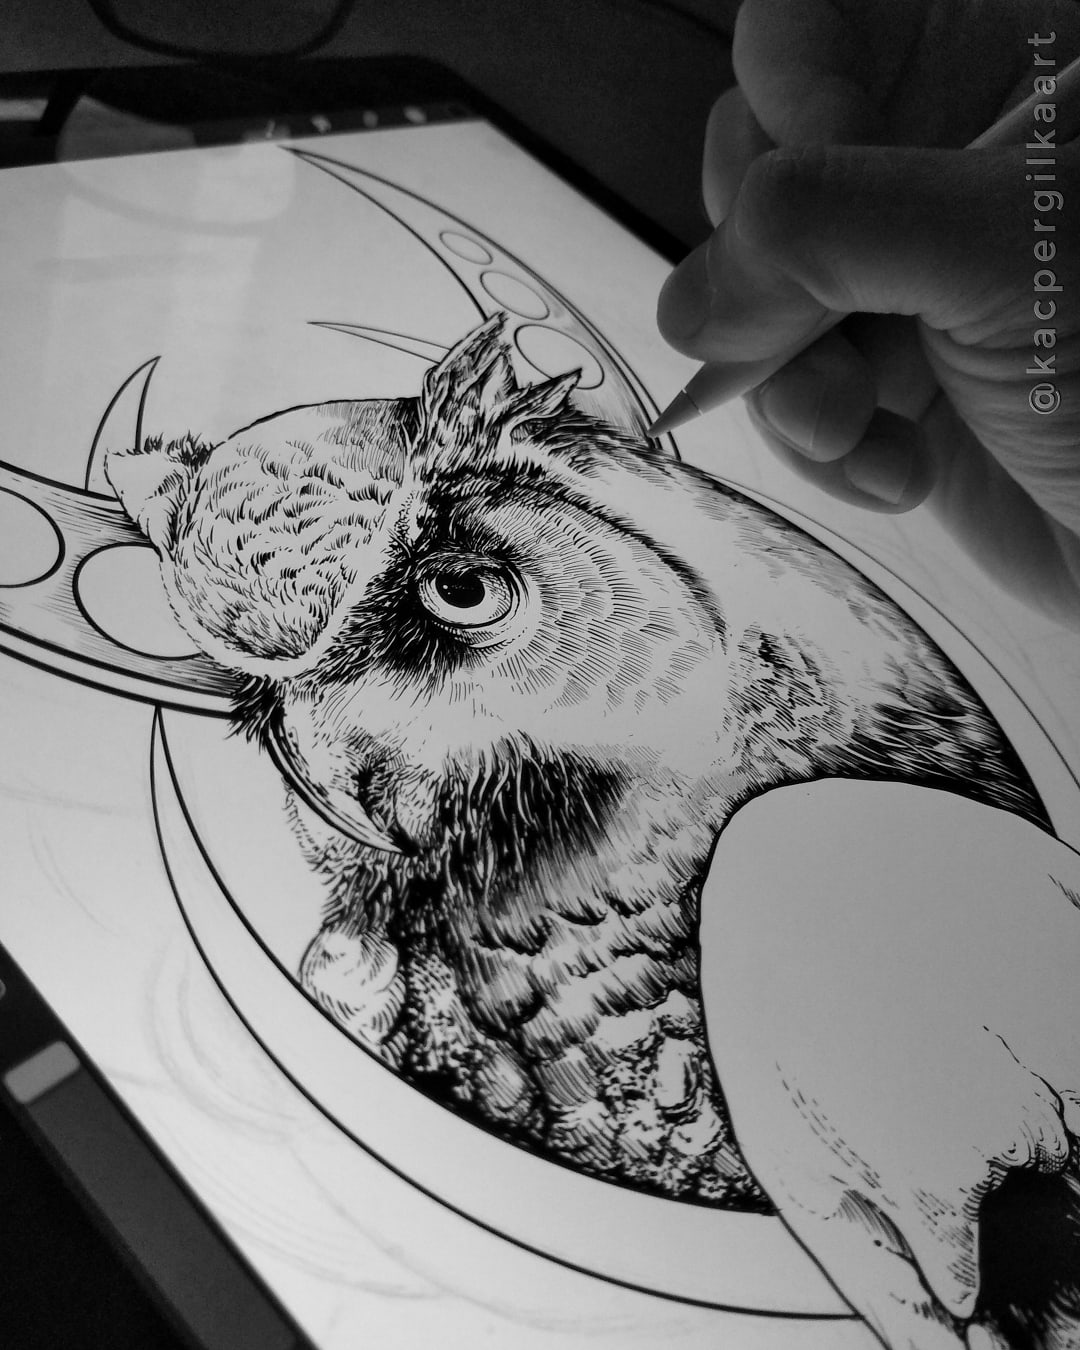 Owl illustration I drew some time ago. It was sold to metal band